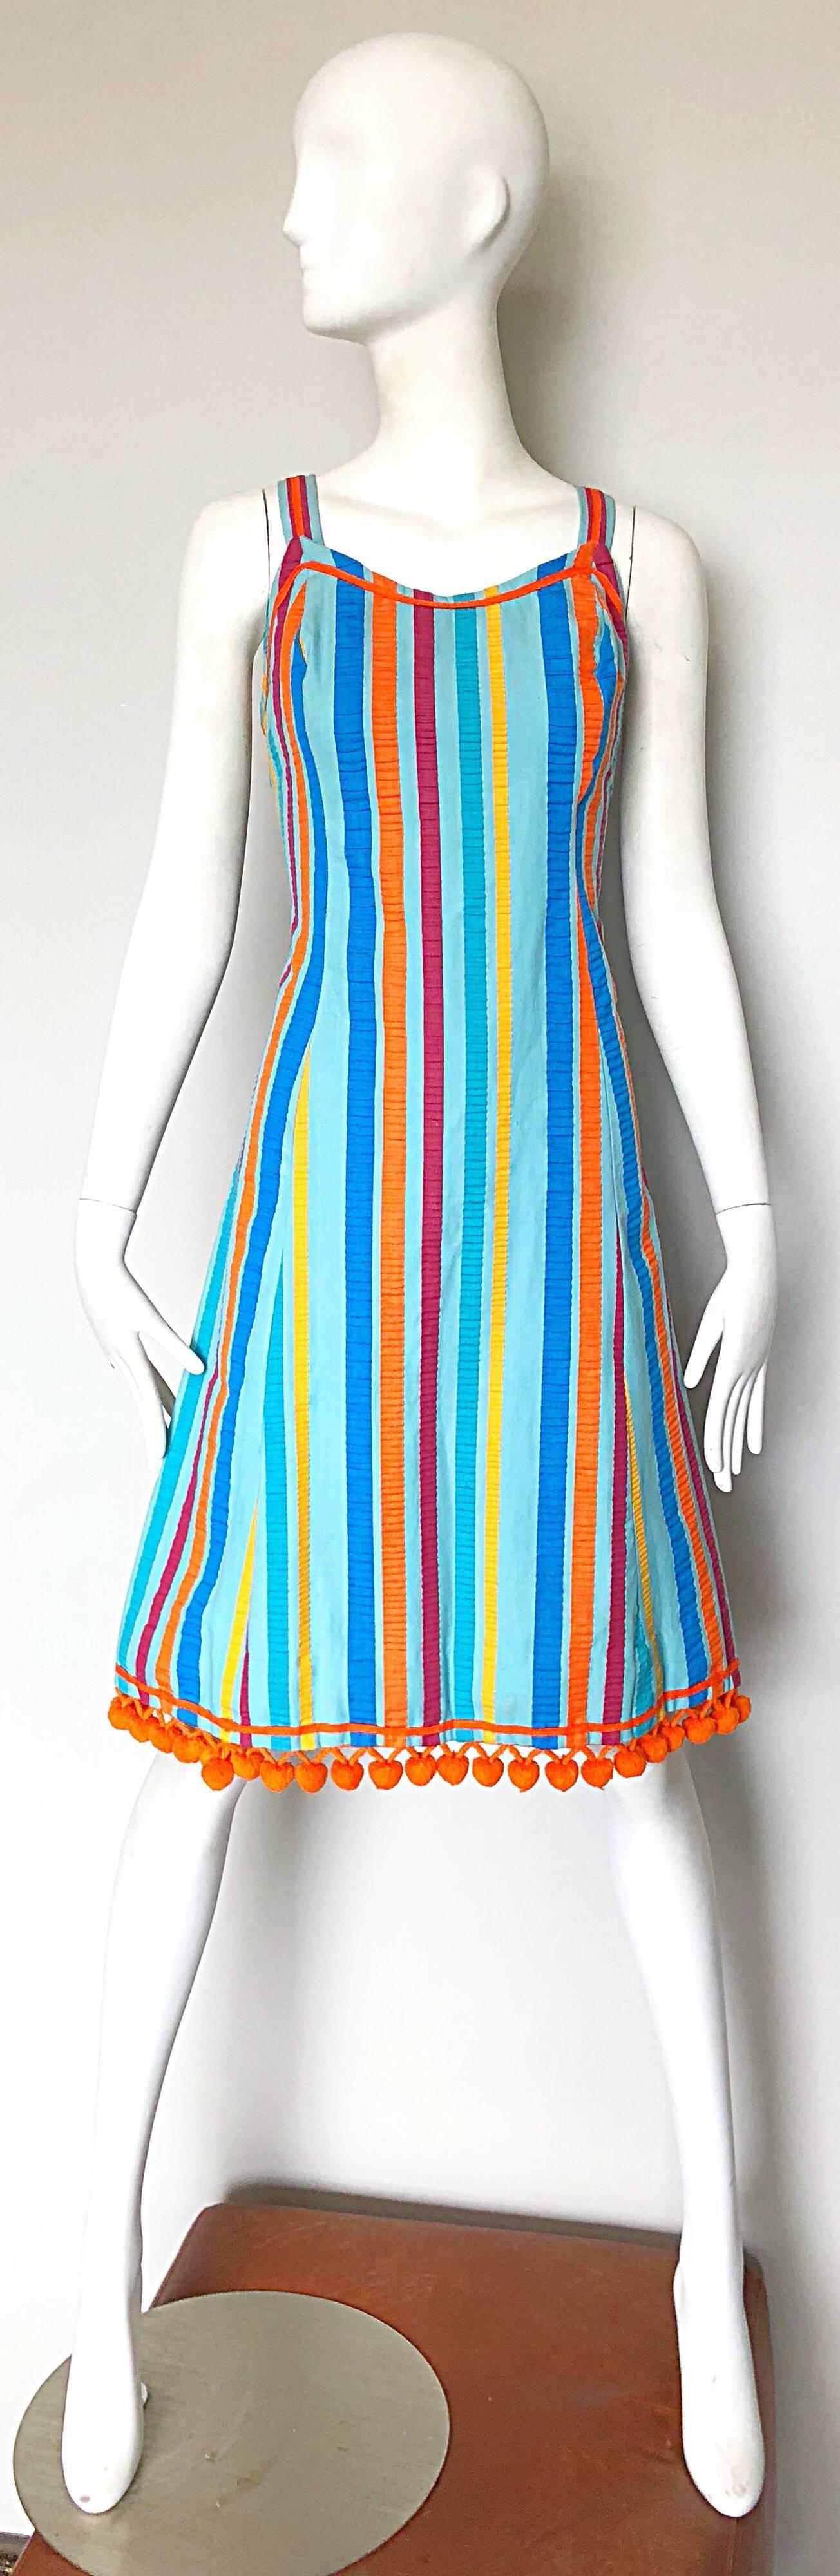 Whimsical and chic TOBY TANNER vintage 1960s colorful striped 'pom pom' cotton A-Line sleeveless dress! Features vibrant vertical stripes in blue, turquoise, raspberry pink, orange and yellow. Fluffy orange pom poms along the entire hem. 
Fitted